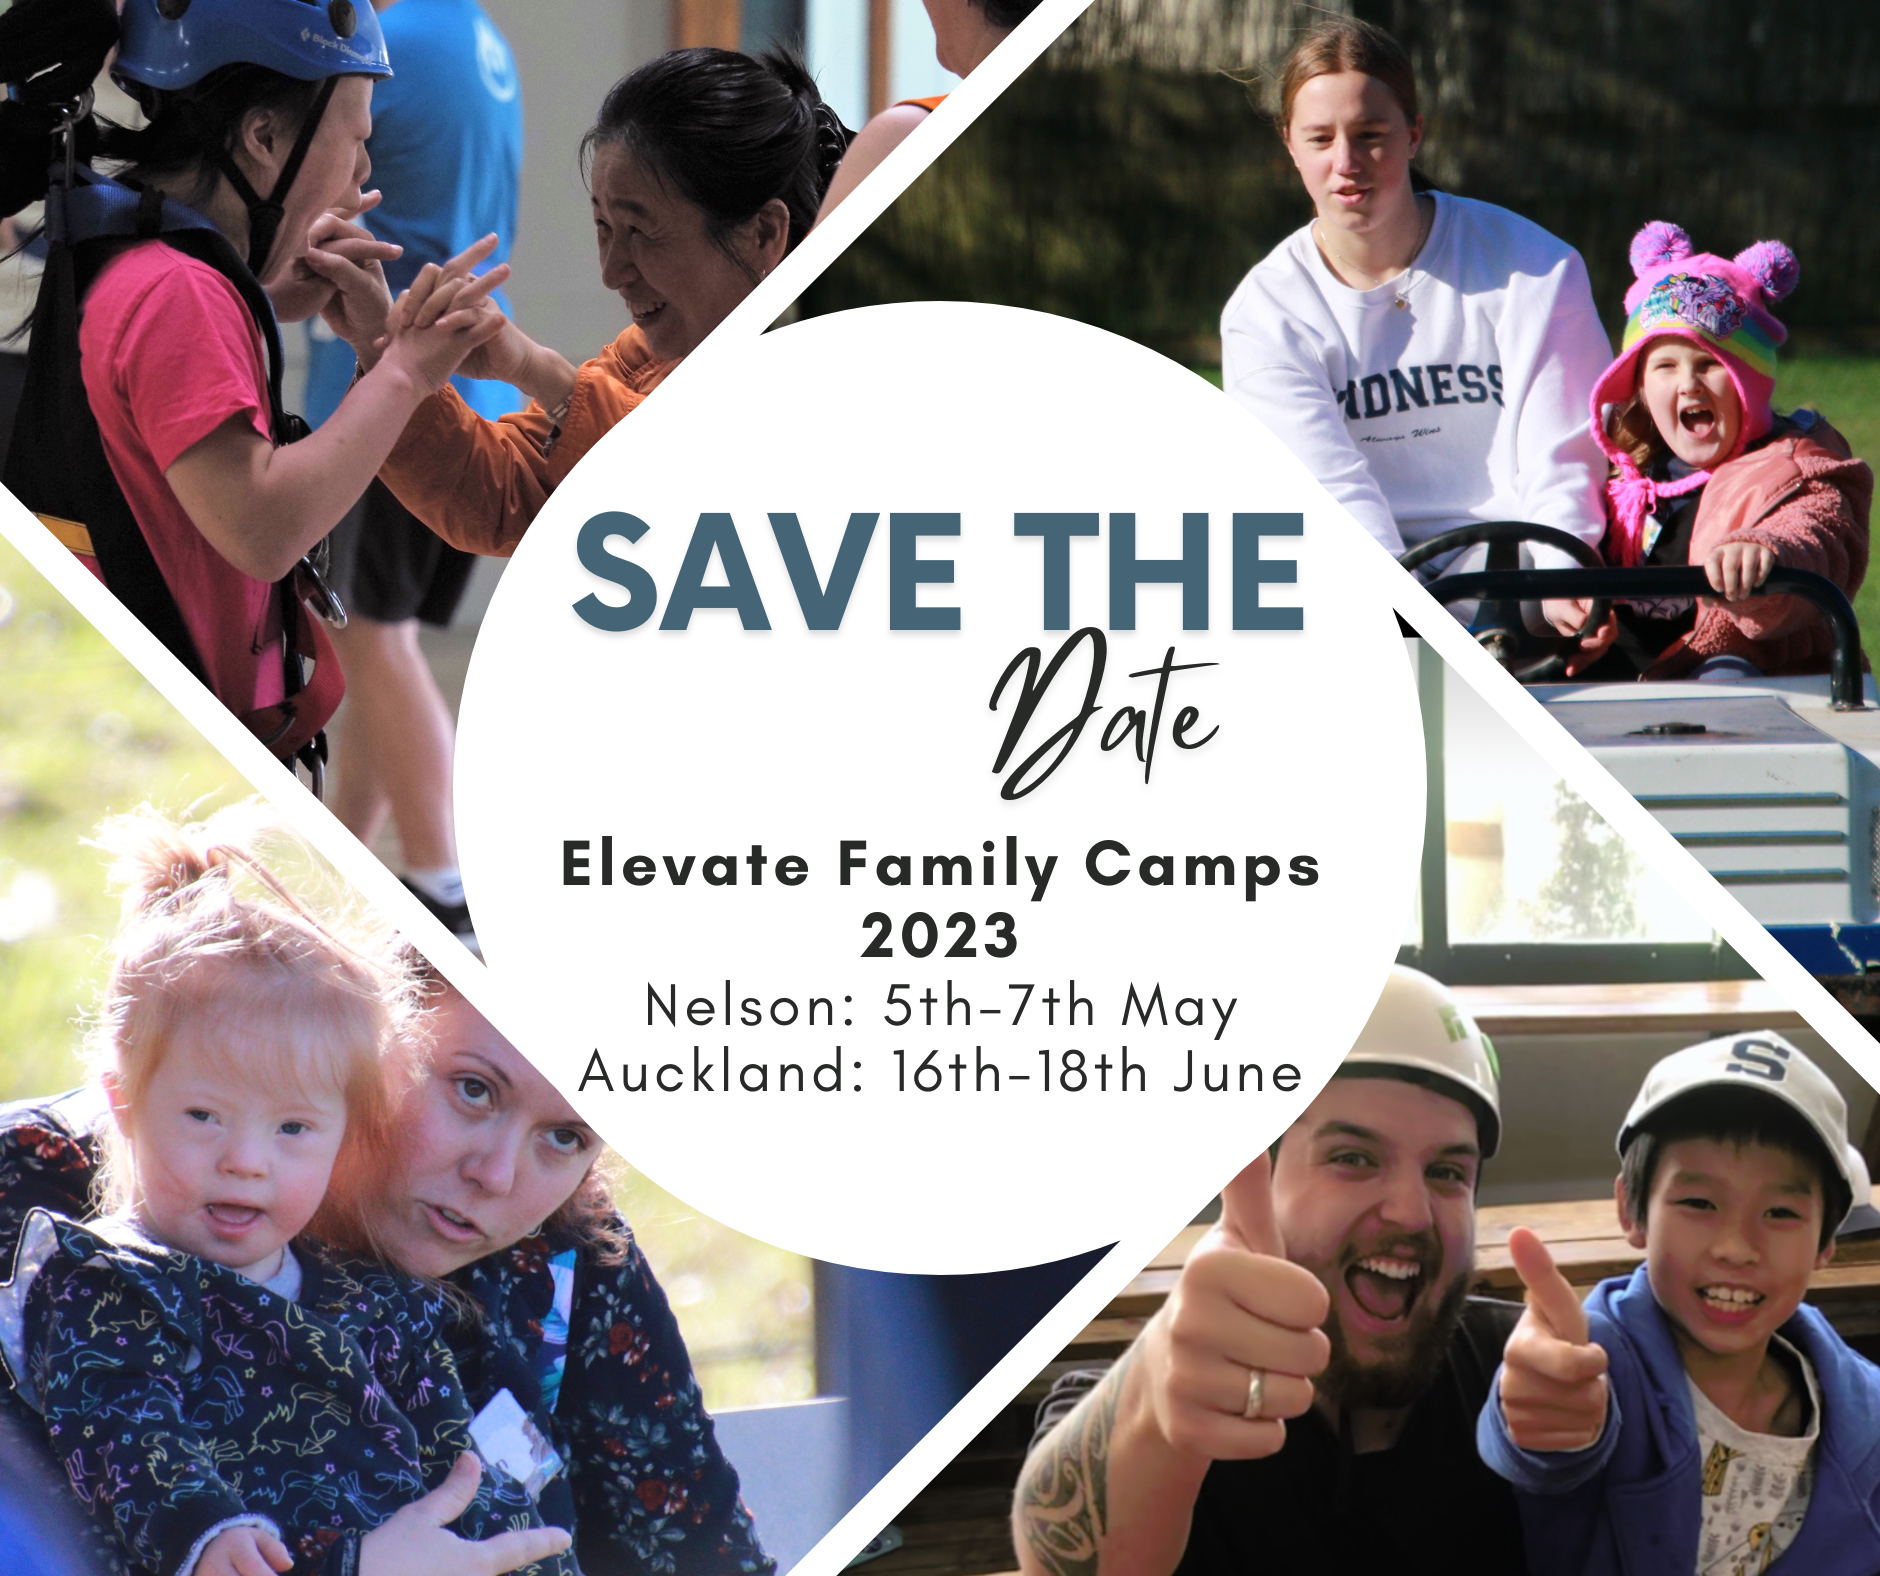 Inside a circle of 4 photos of campers smiling at the camera are the words "Save the Date: Elevate Family Camps 2023. Nelson : 5th-7th May. Auckland: 16th-18th June"